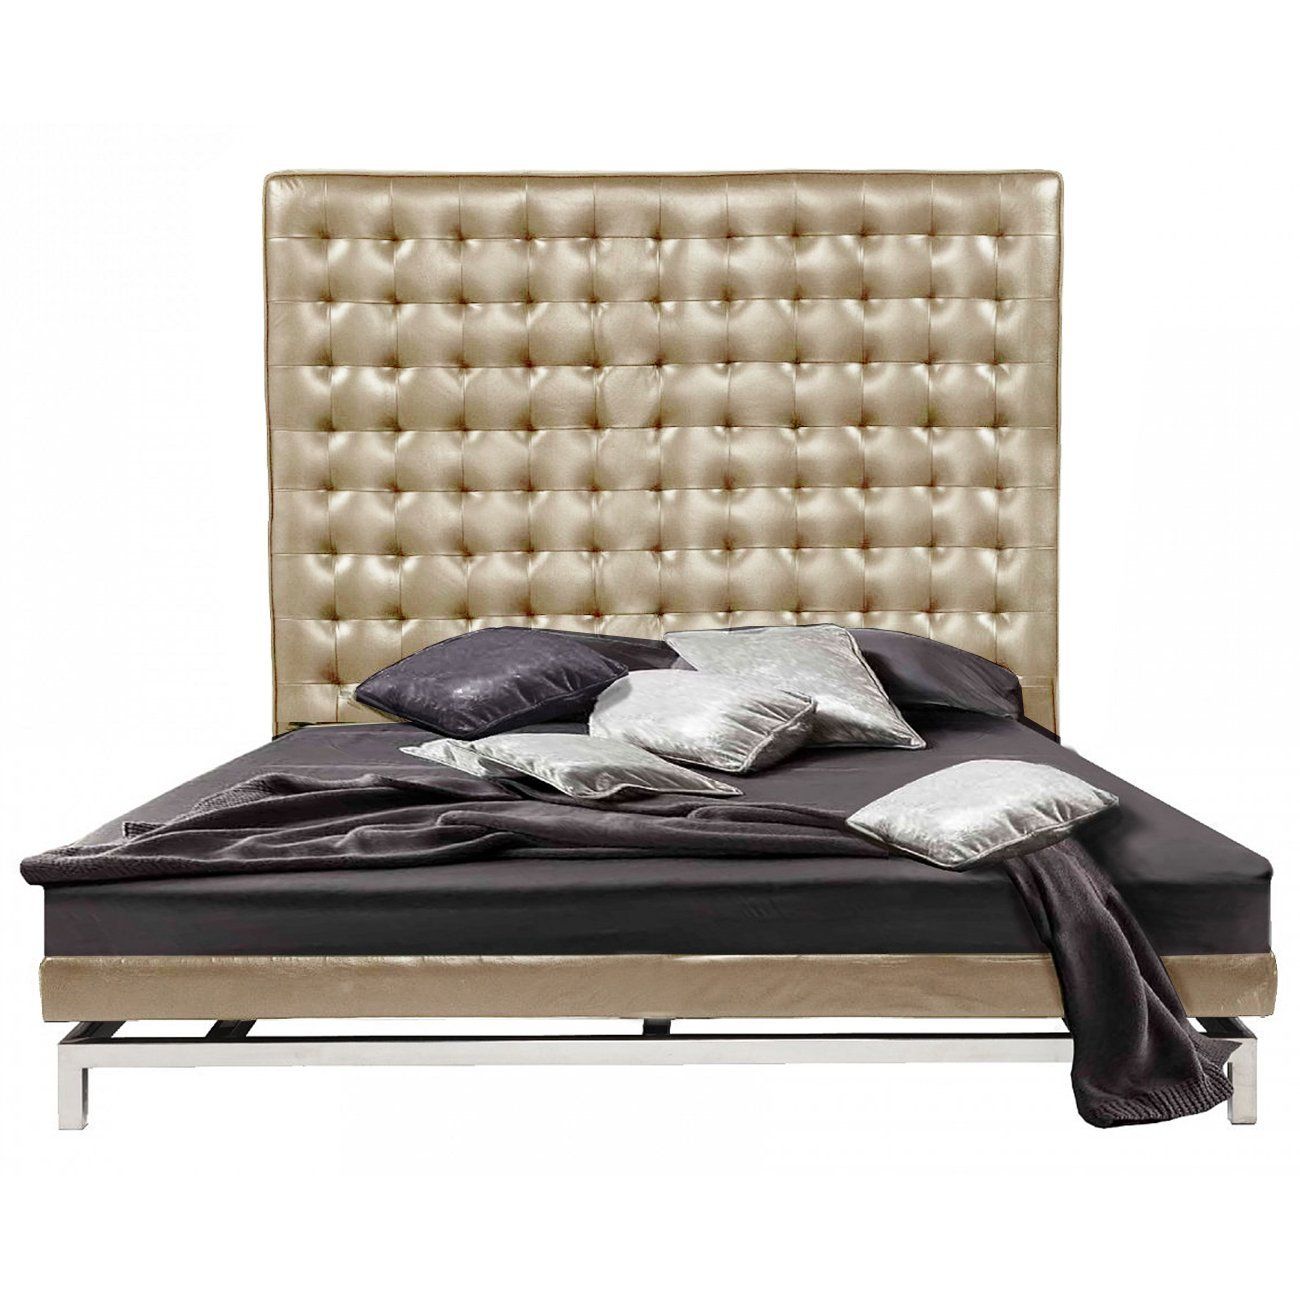 Double bed 180x200 eco-leather beige Boss Bed